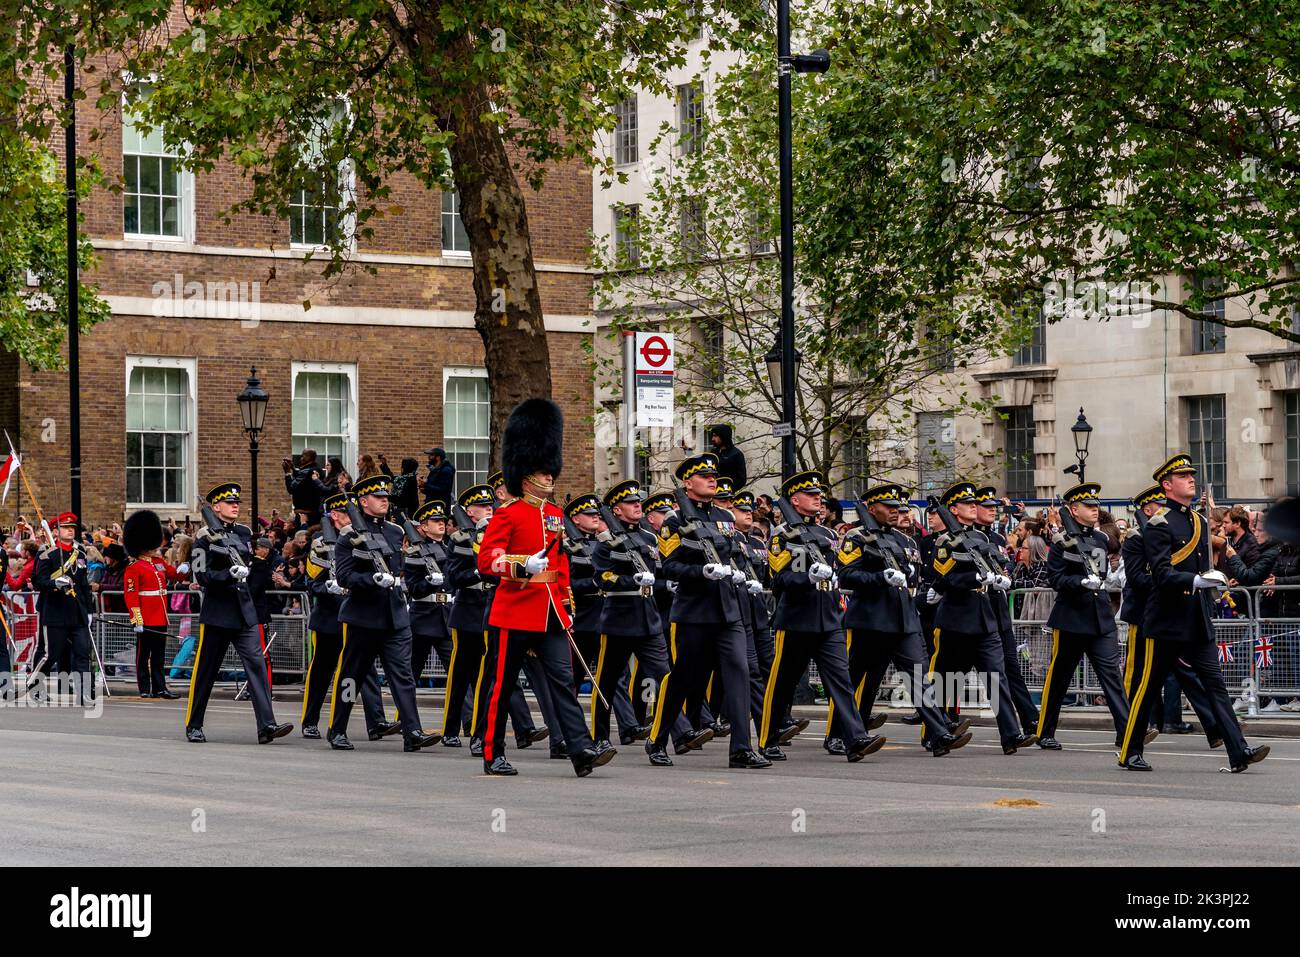 A British Military Regiment Marches Up Whitehall During The Queen Elizabeth II Funeral Procession, Whitehall, London, UK. Stock Photo